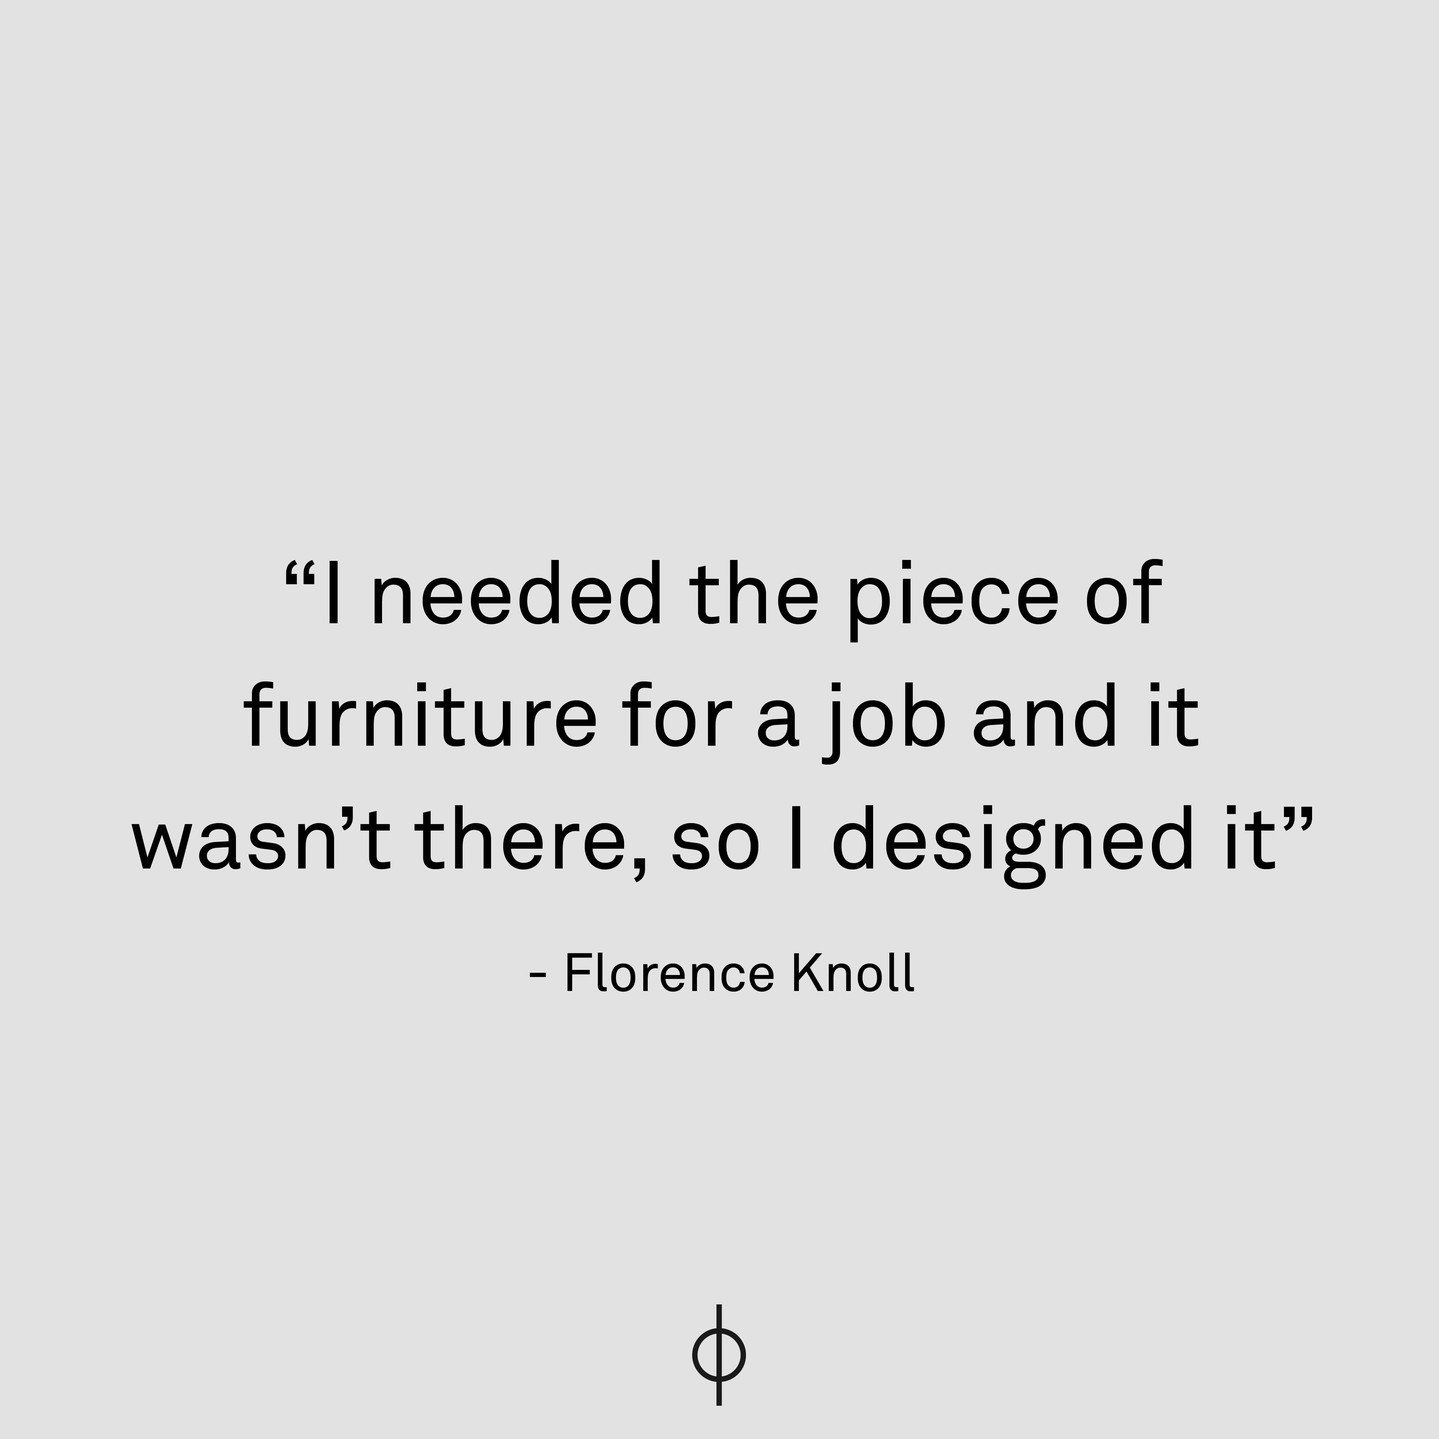 I needed the piece of furniture for a job and it wasn&rsquo;t there, so I designed it. 

- Florence Knoll

#fluxstudioltd